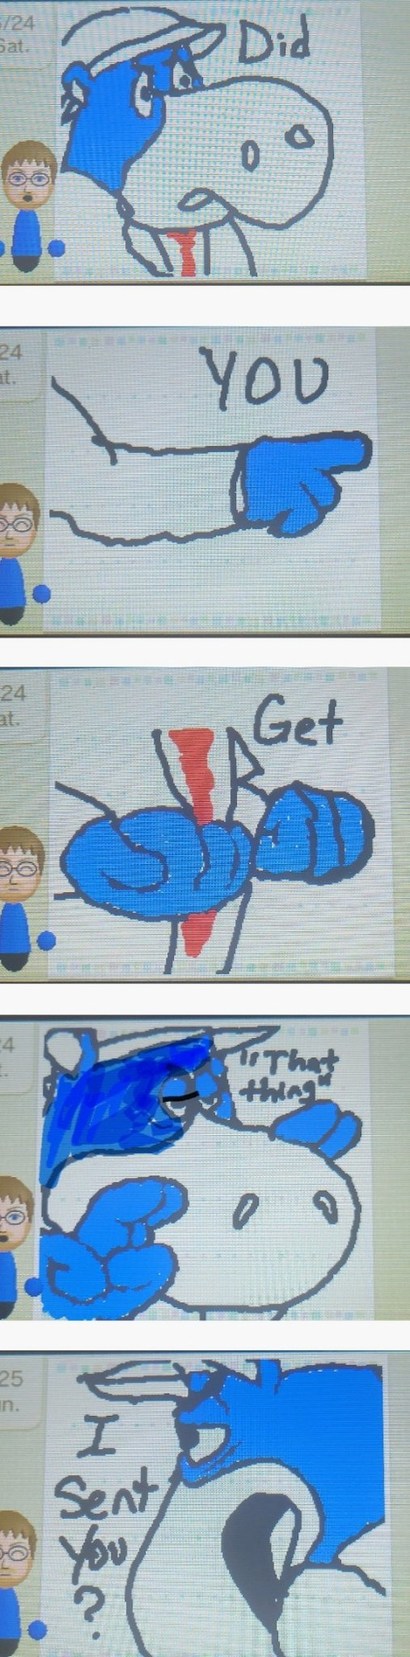 Did you get the meme I sent you? (3DS Swapdoodle)